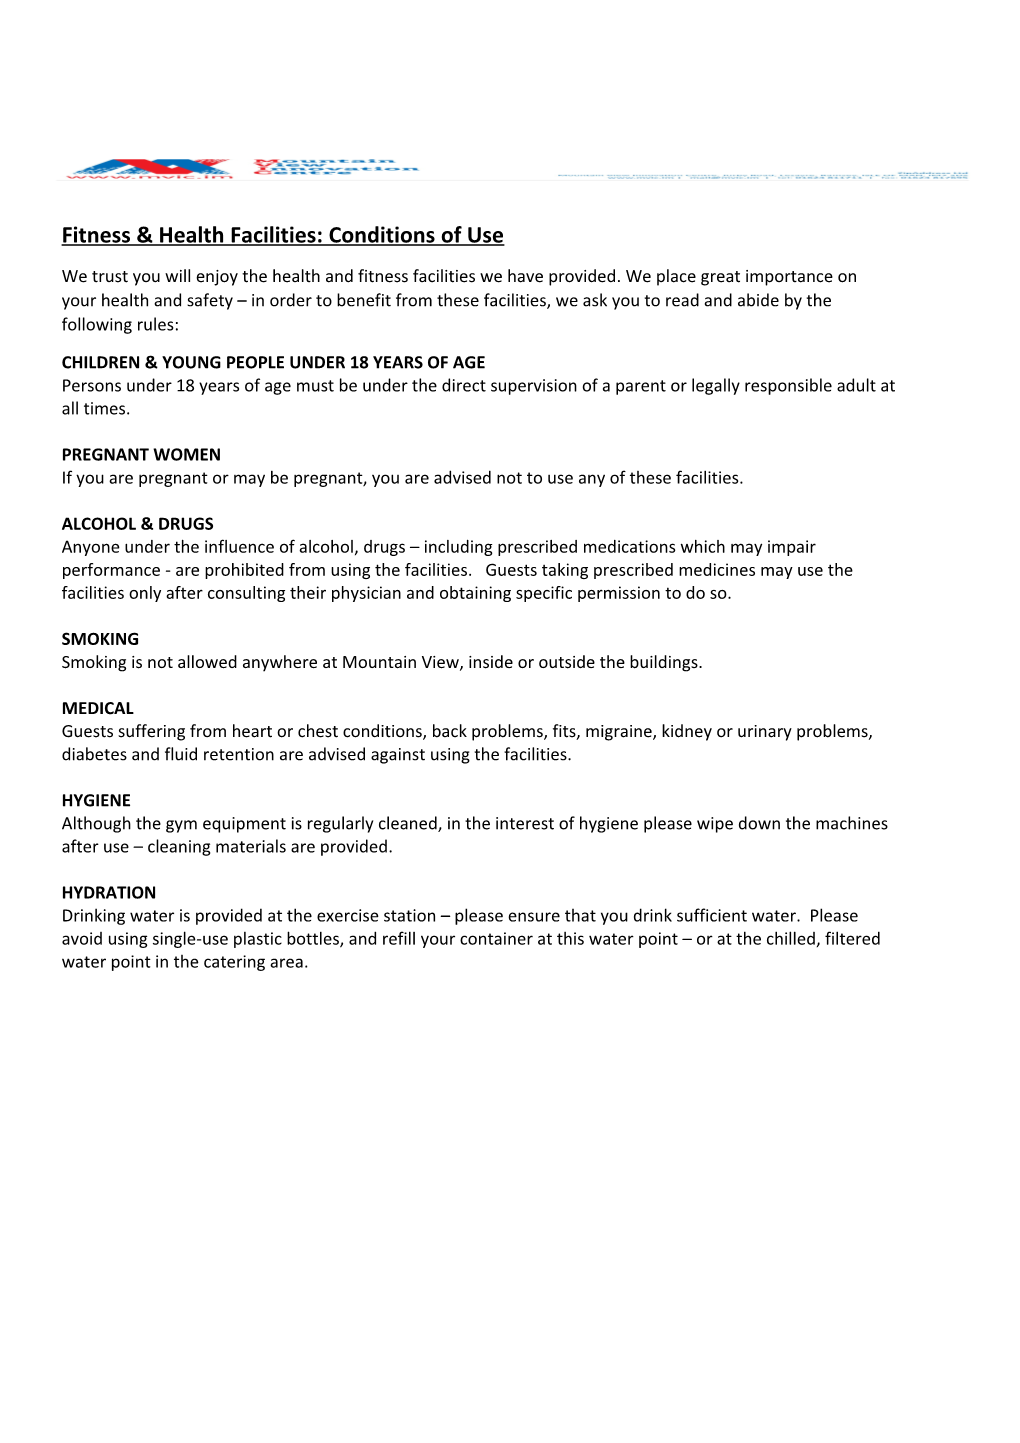 Fitness & Health Facilities: Conditions of Use